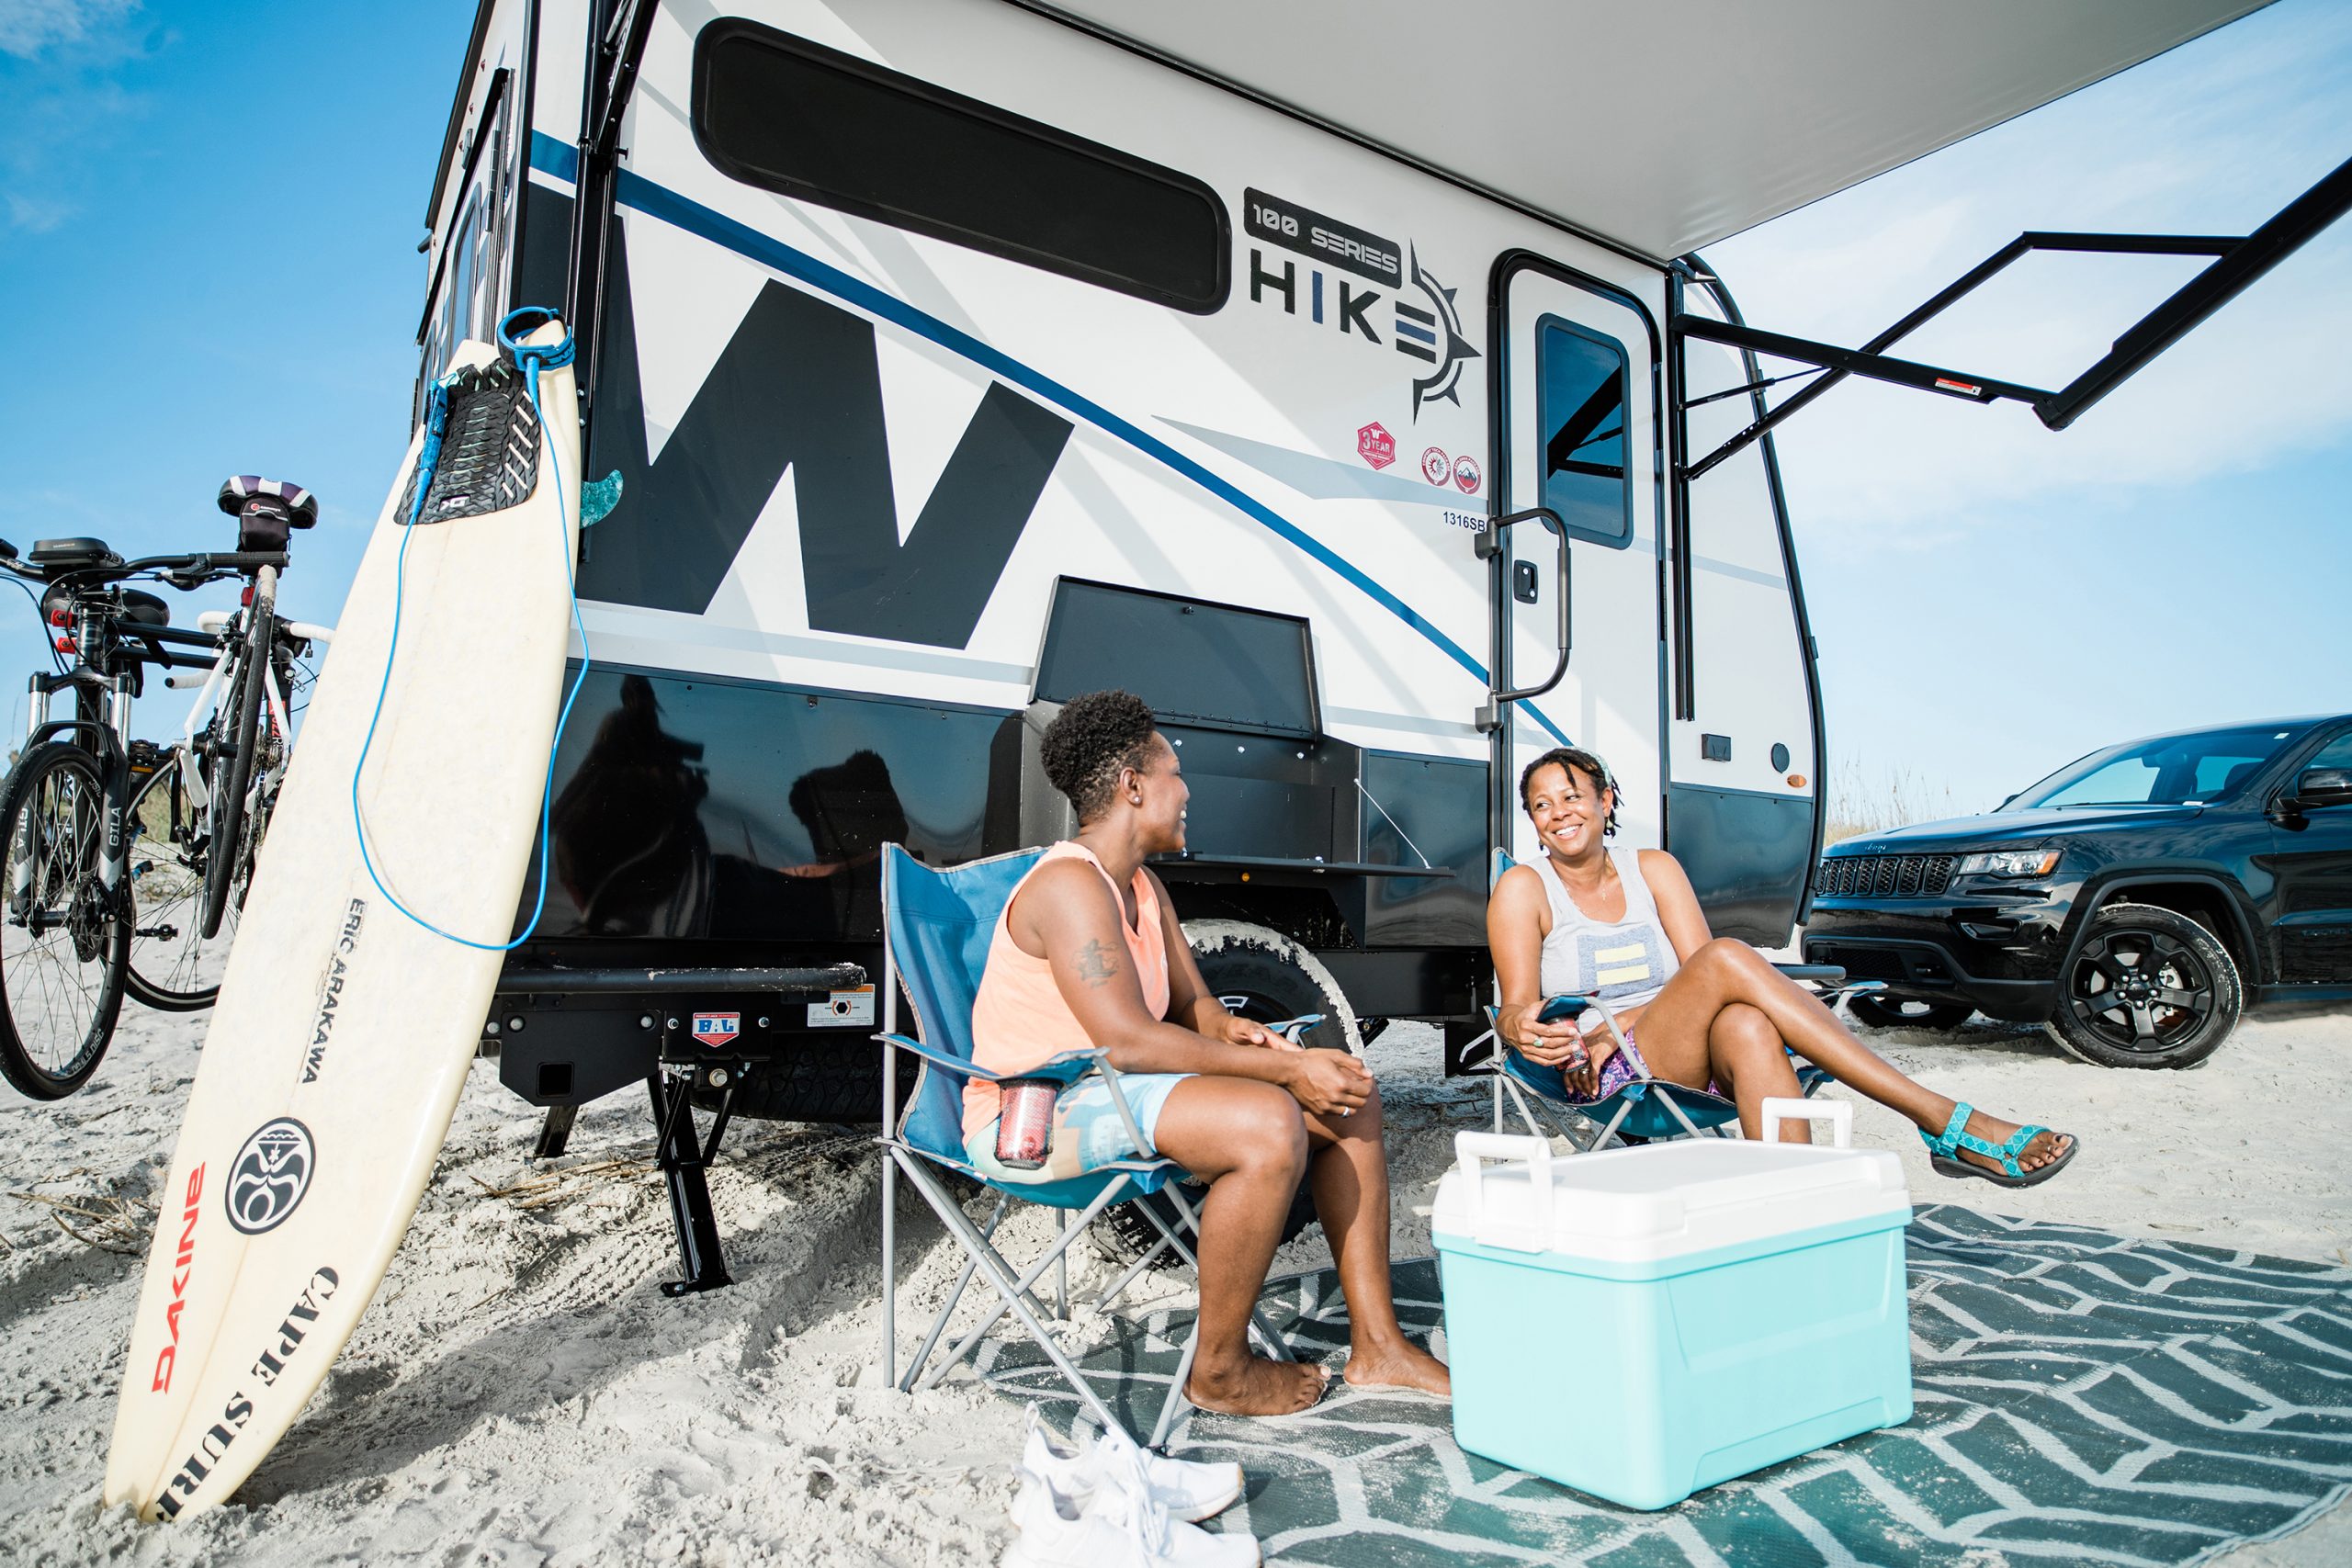 Winnebago’s New Limited-Edition RVs on Display at Hershey